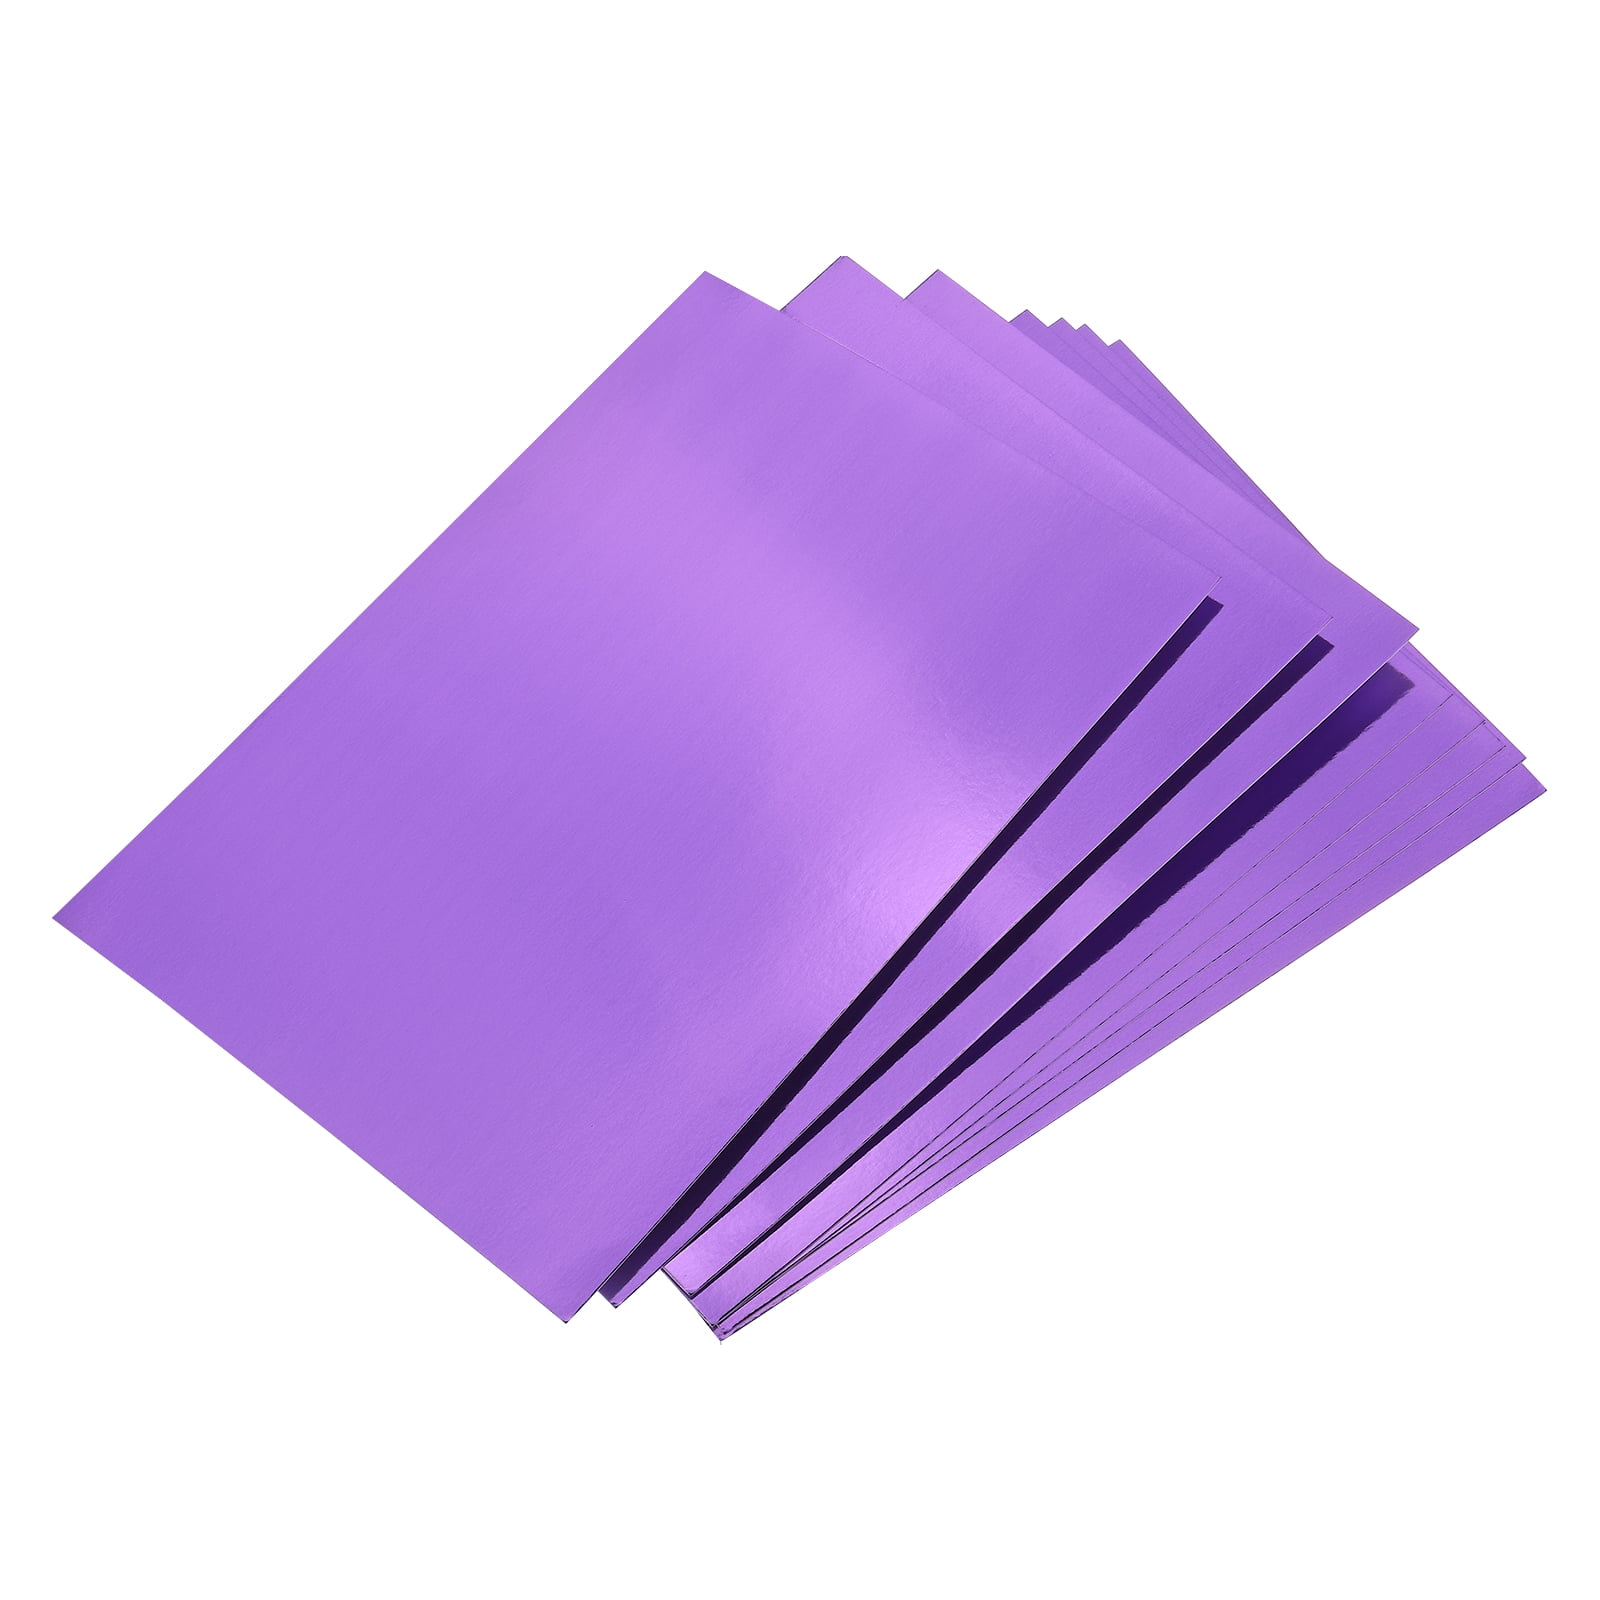 Primary Foil Cardstock Paper Pack - 8 1/2 x 11